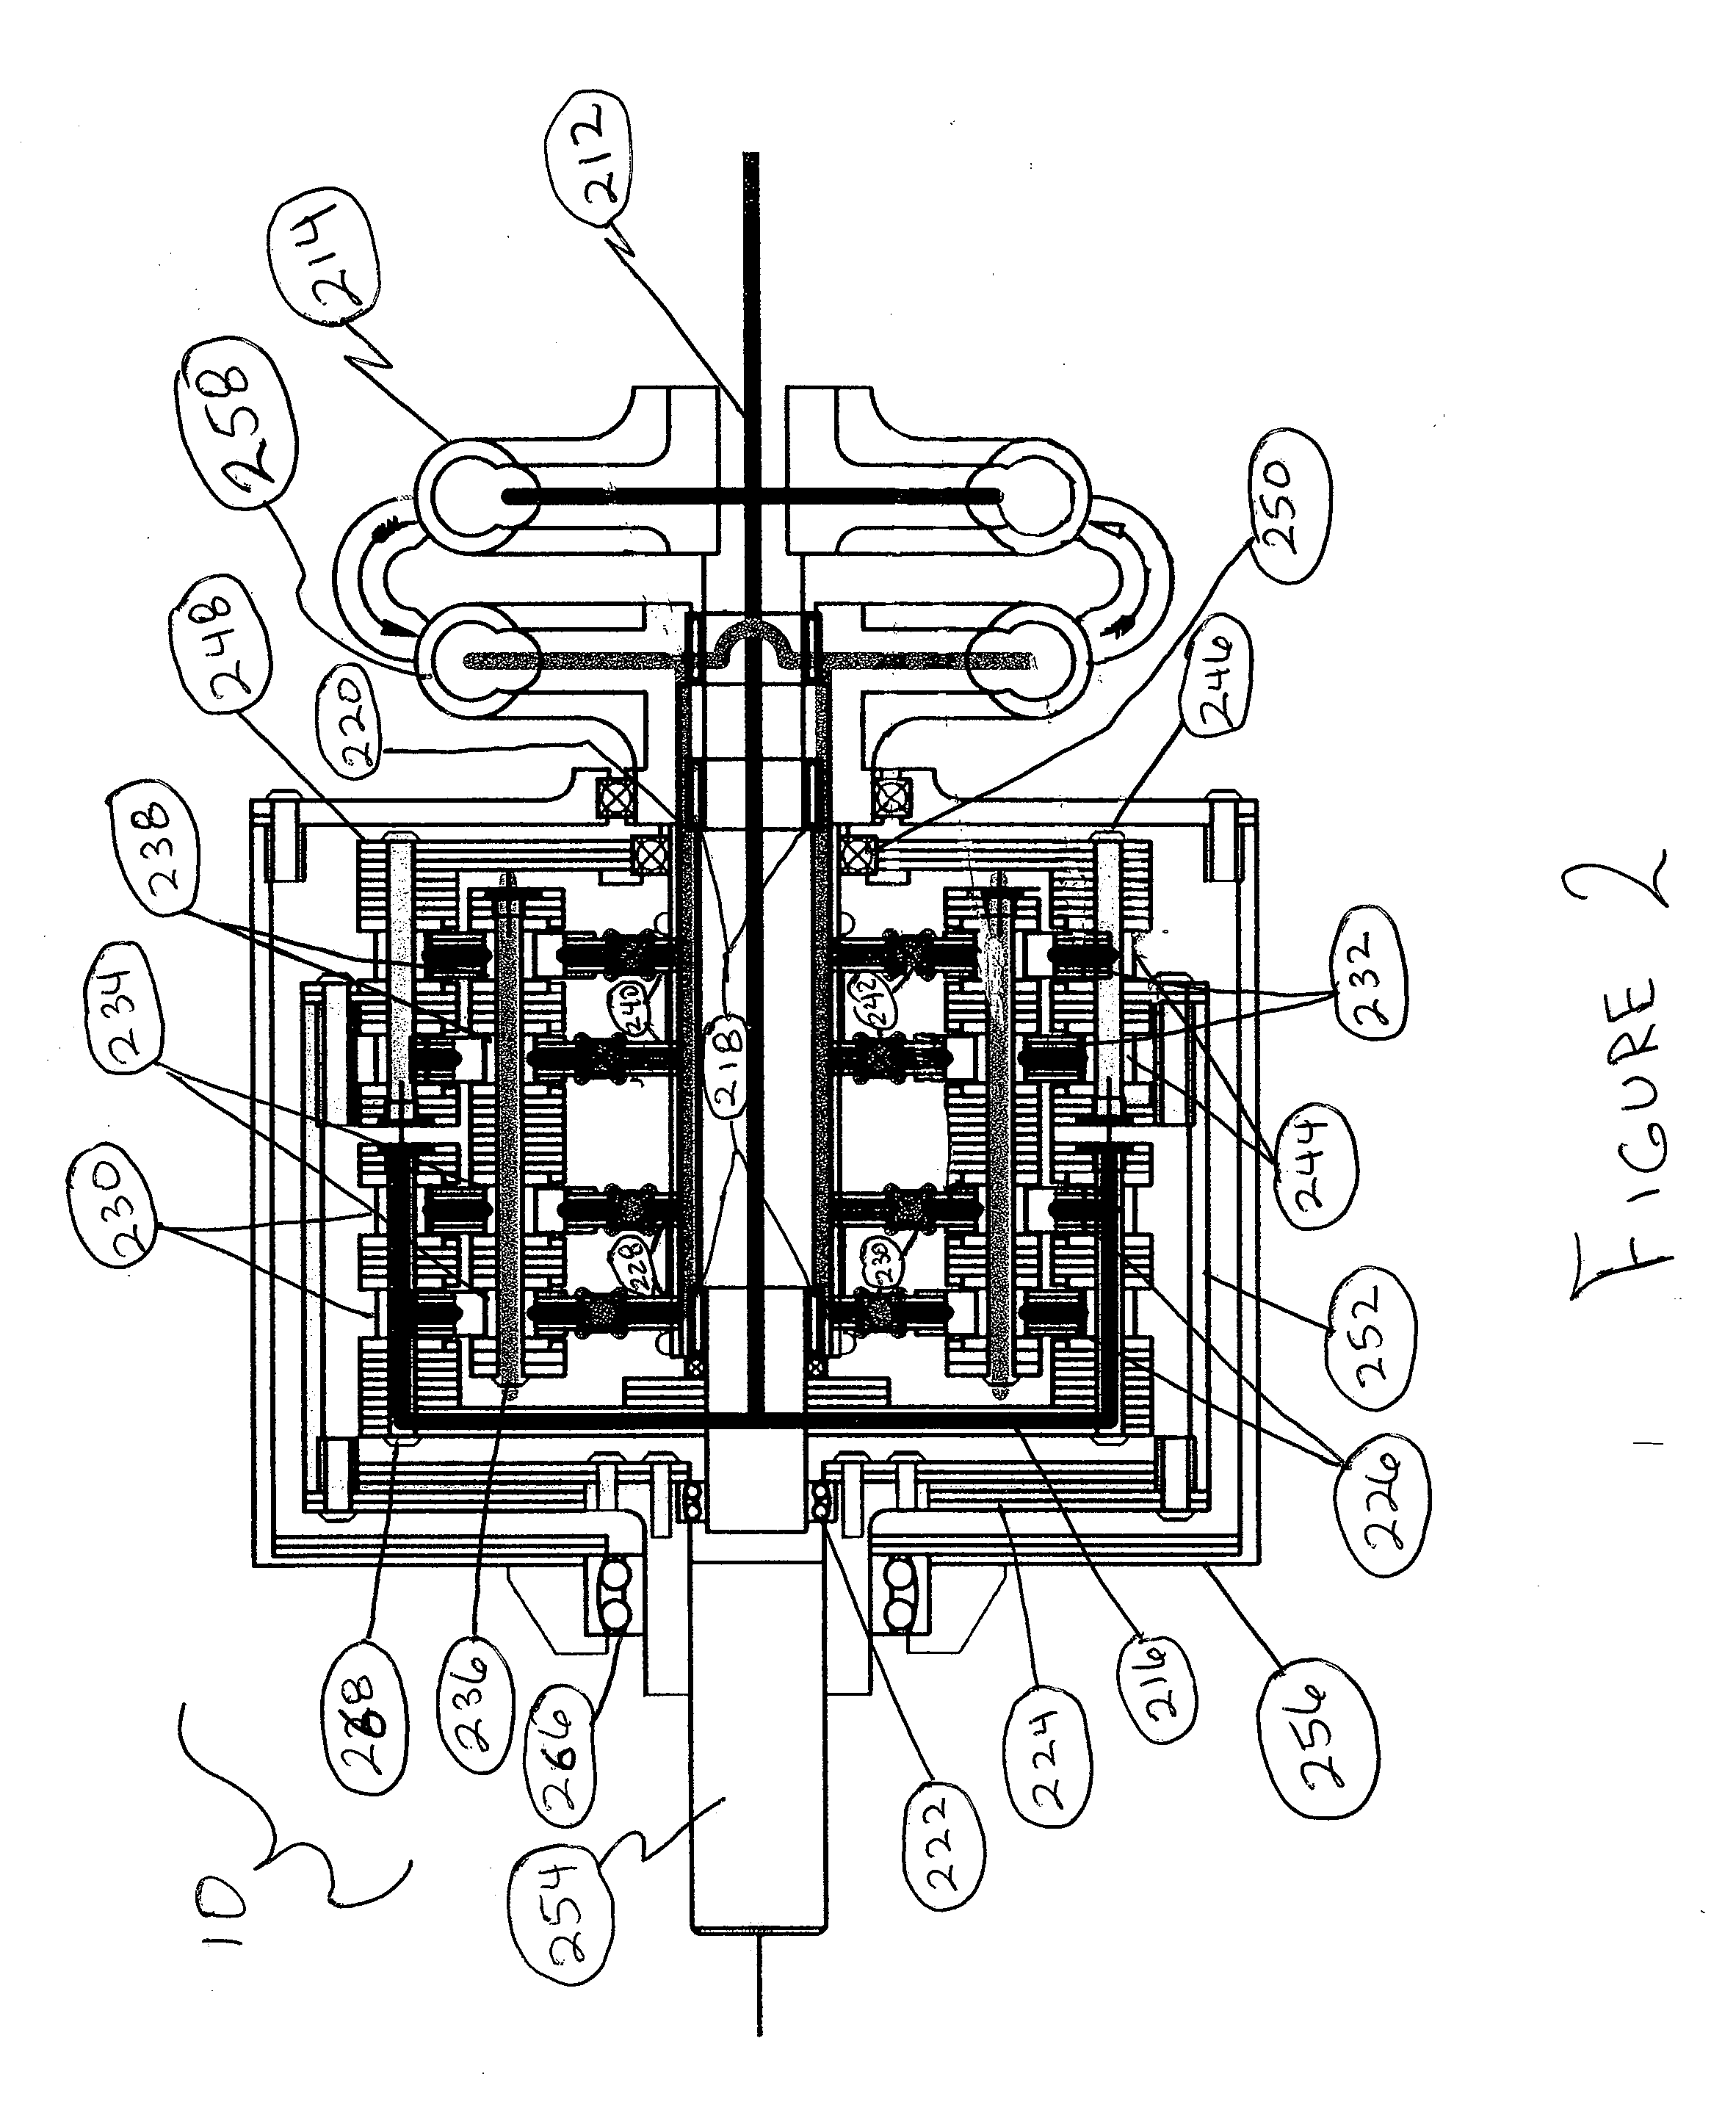 Power transmission system with continuously variable speed control